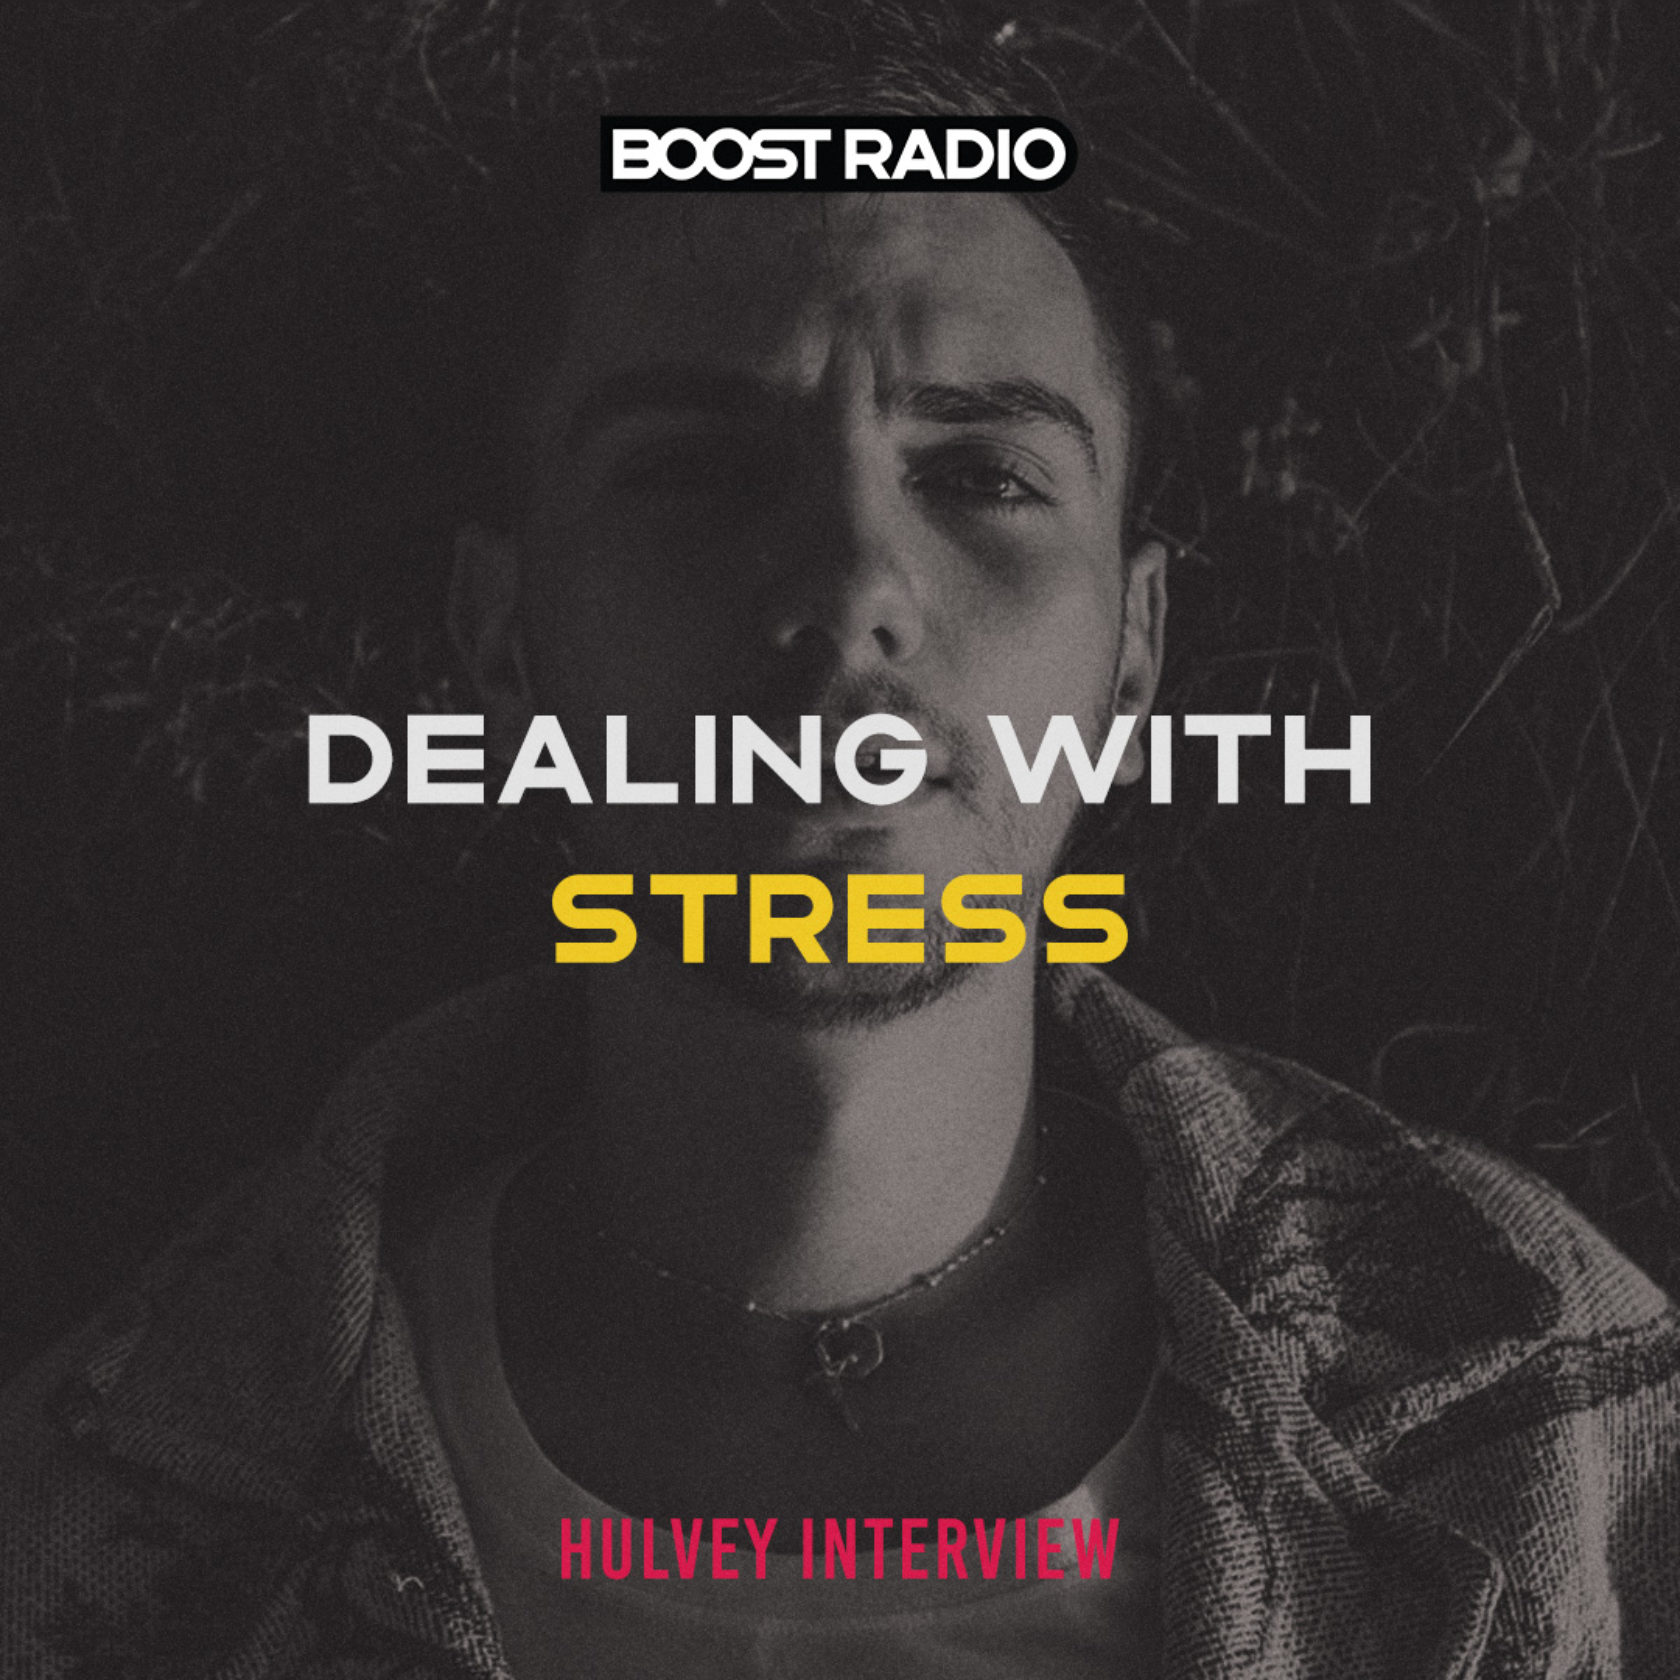 Hulvey's Biggest Tip to Deal with Stress